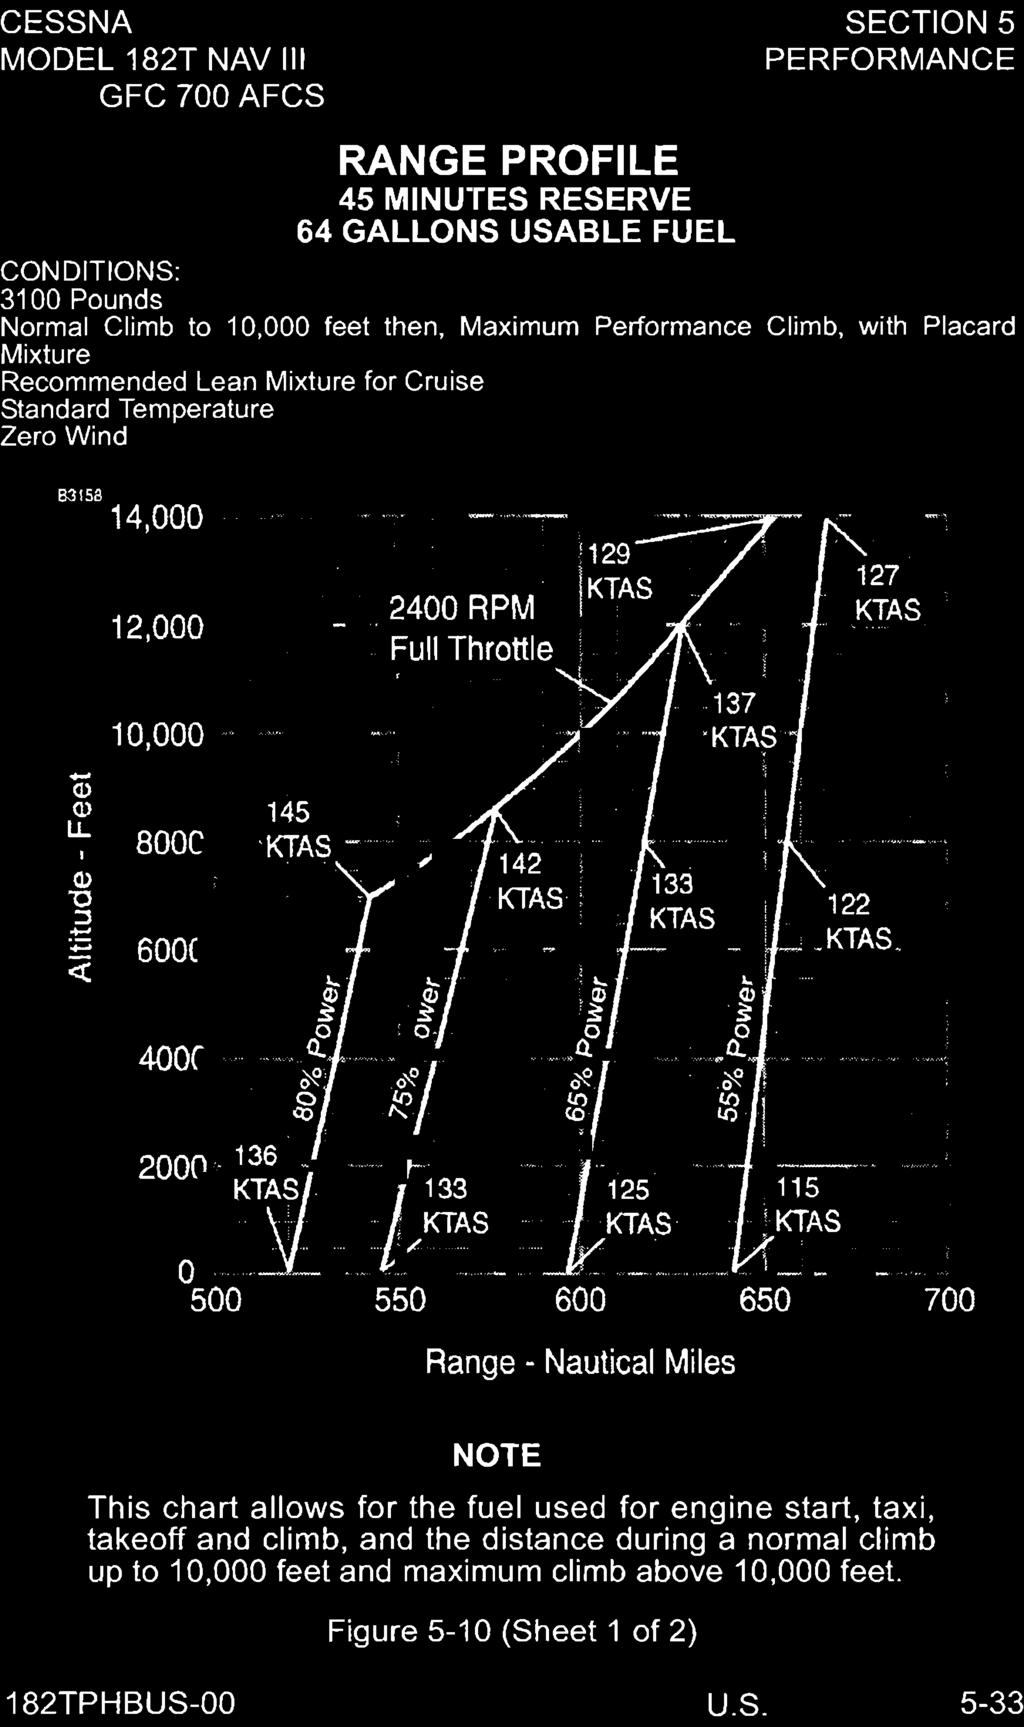 . 8000 6000 550 600 650 700 Range - Nautical Miles NOTE This chart allows for the fuel used for